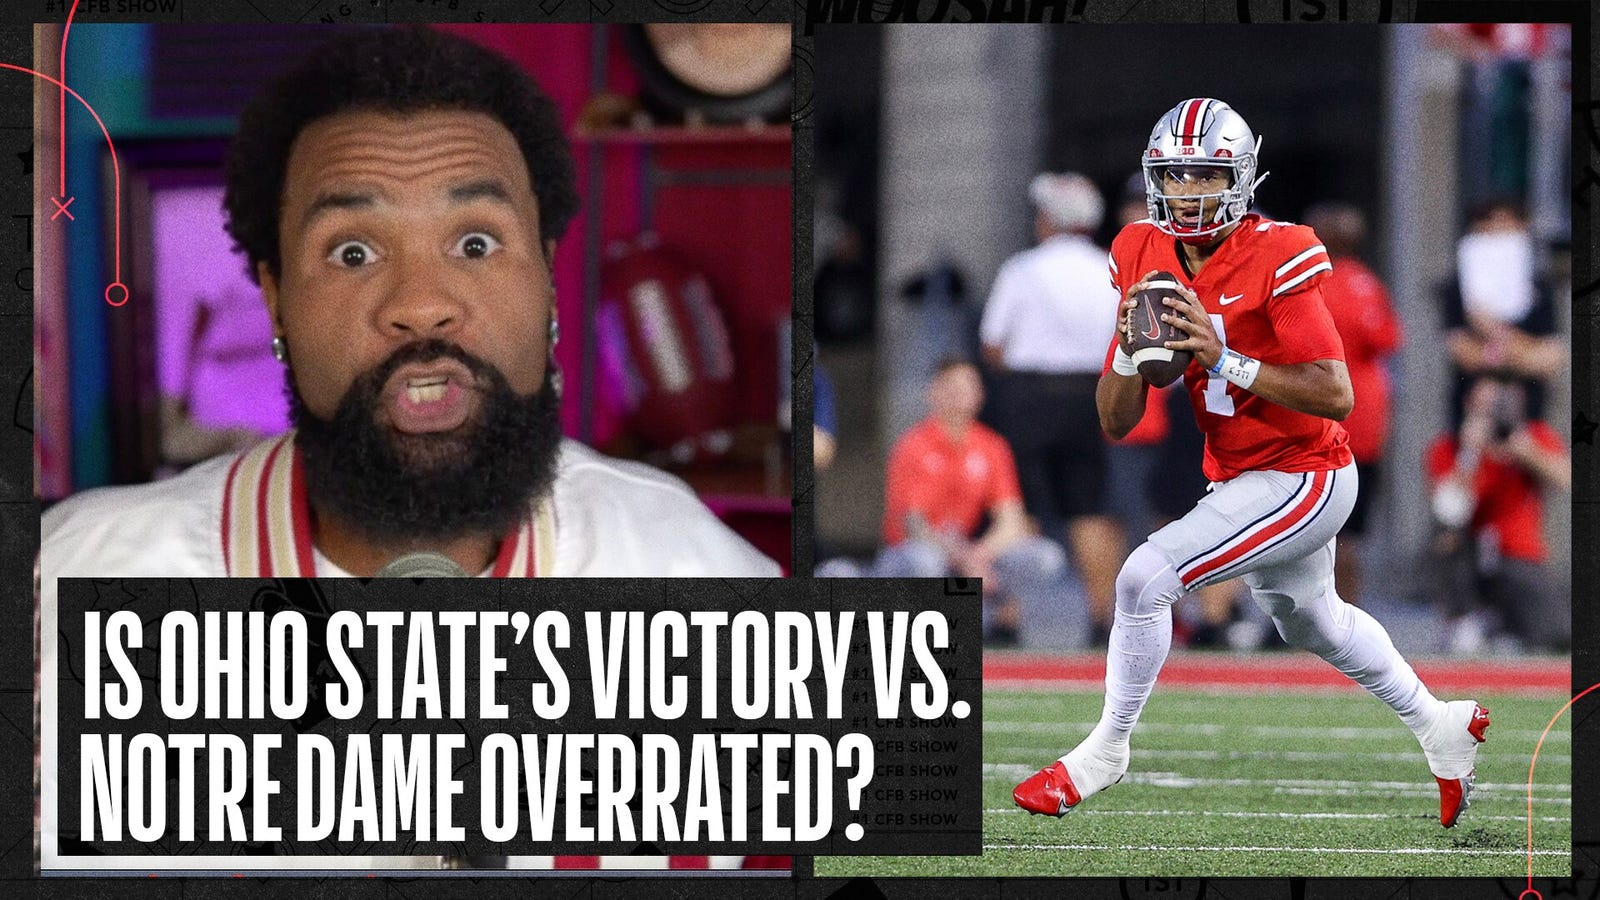 Is Ohio State's win over Notre Dame still a quality win?